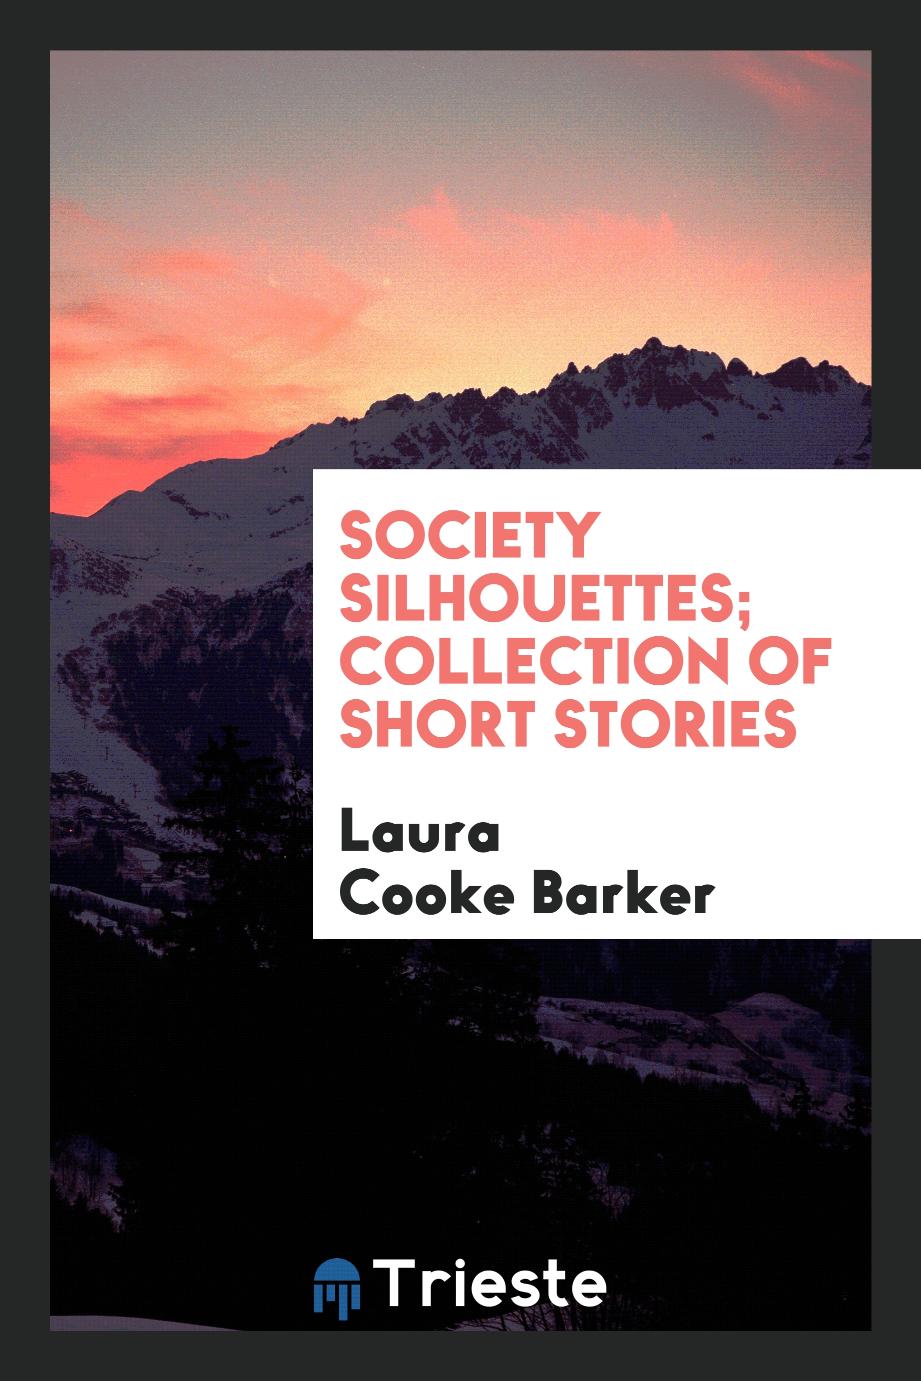 Society silhouettes; collection of short stories